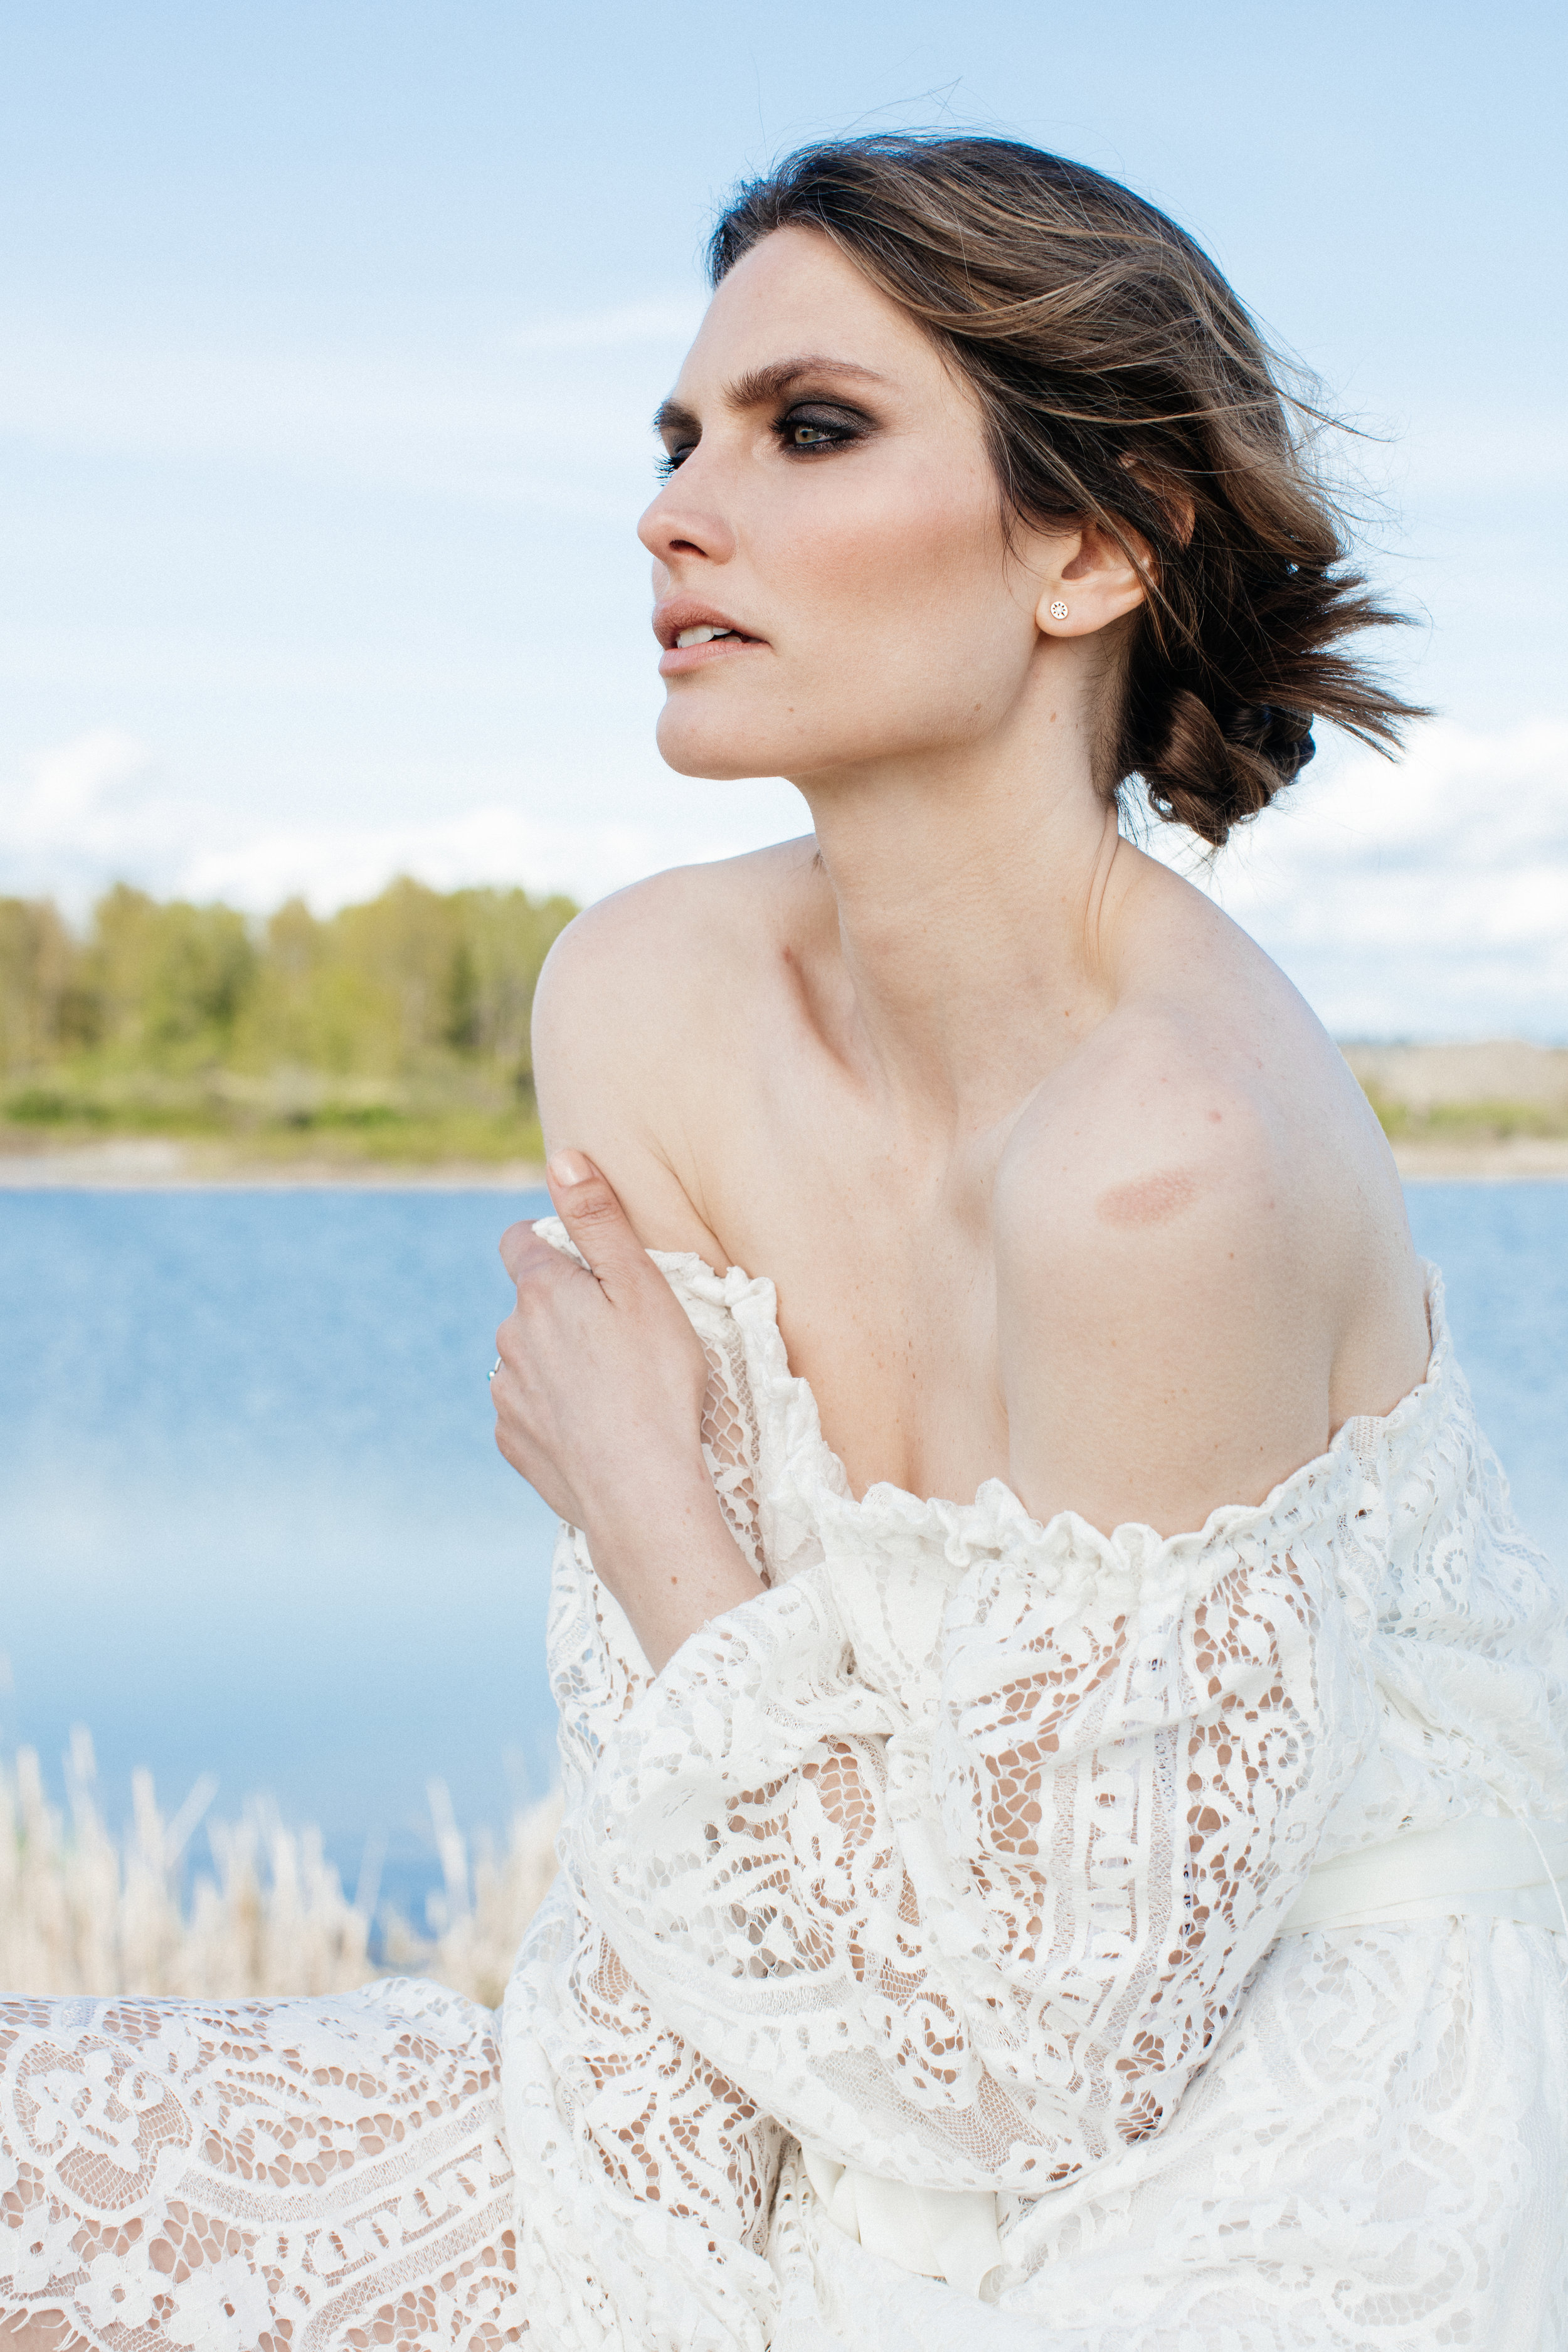 Model Kristy McQuade wearing a white lace dress on a editorial fashion photoshoot. 